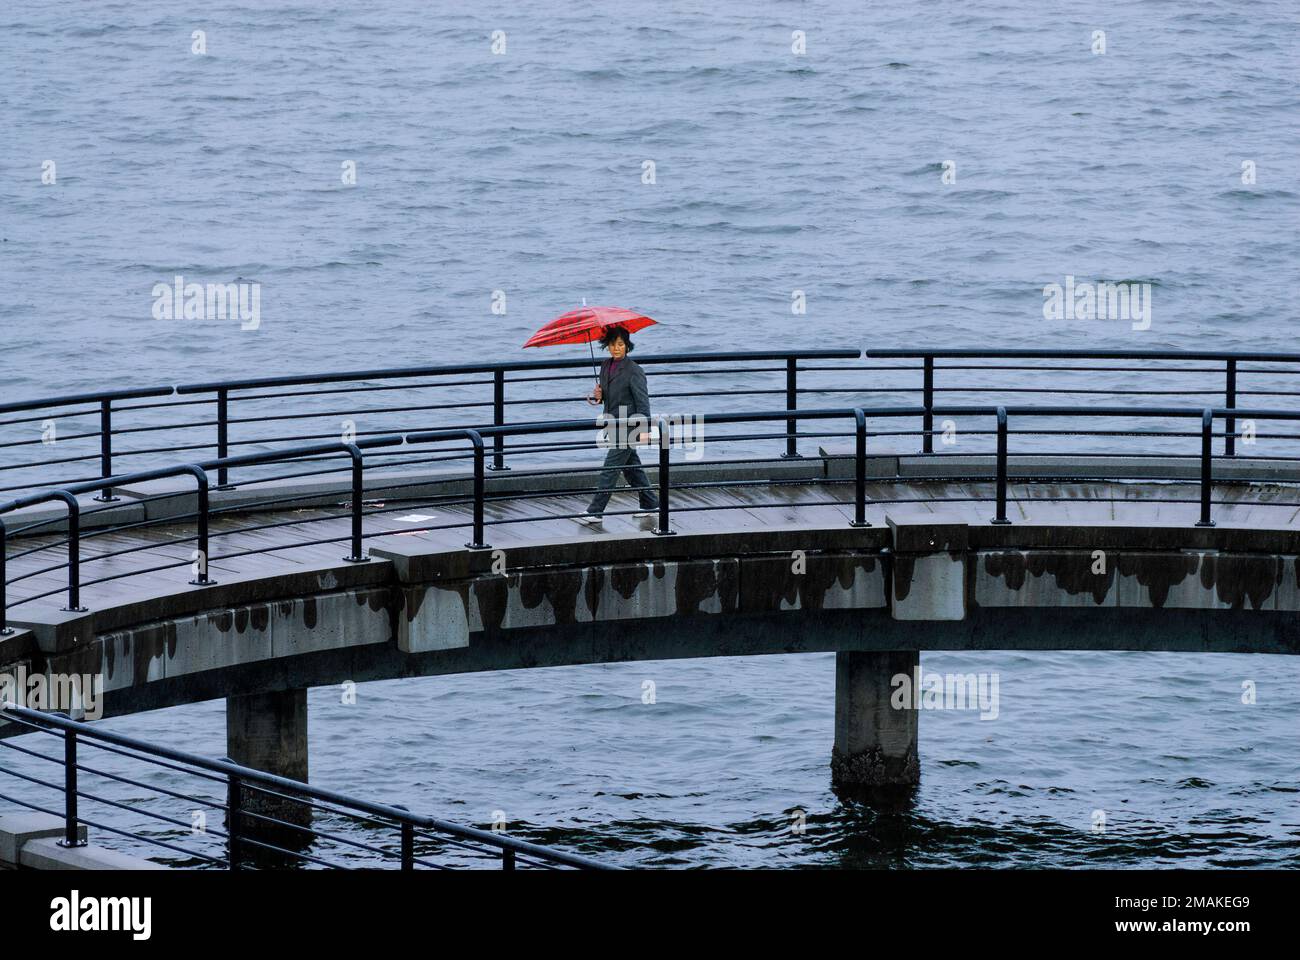 An Asian woman walking across an ocean concrete pier or jetty carrying a red umbrella Stock Photo